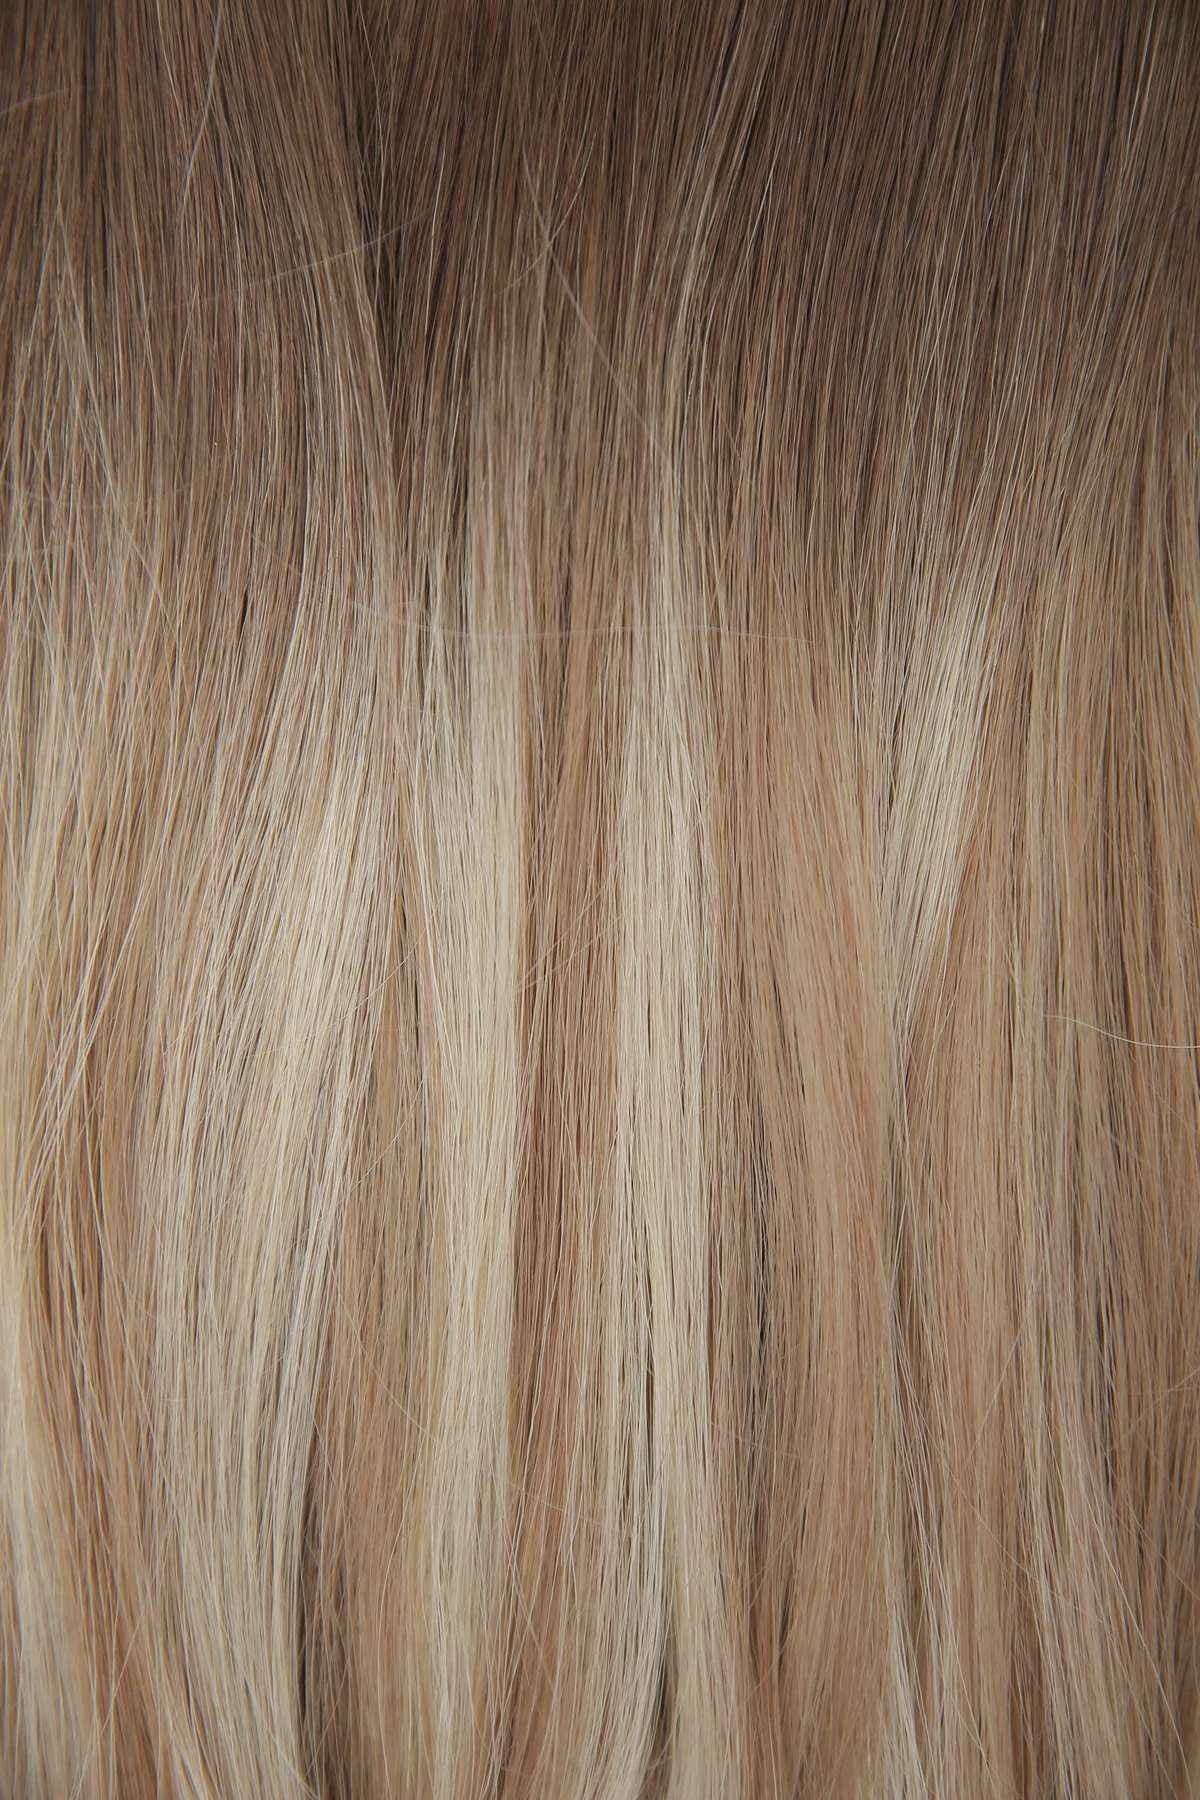 #Iced Coffee Balayage Invisi Tape Hair Extensions